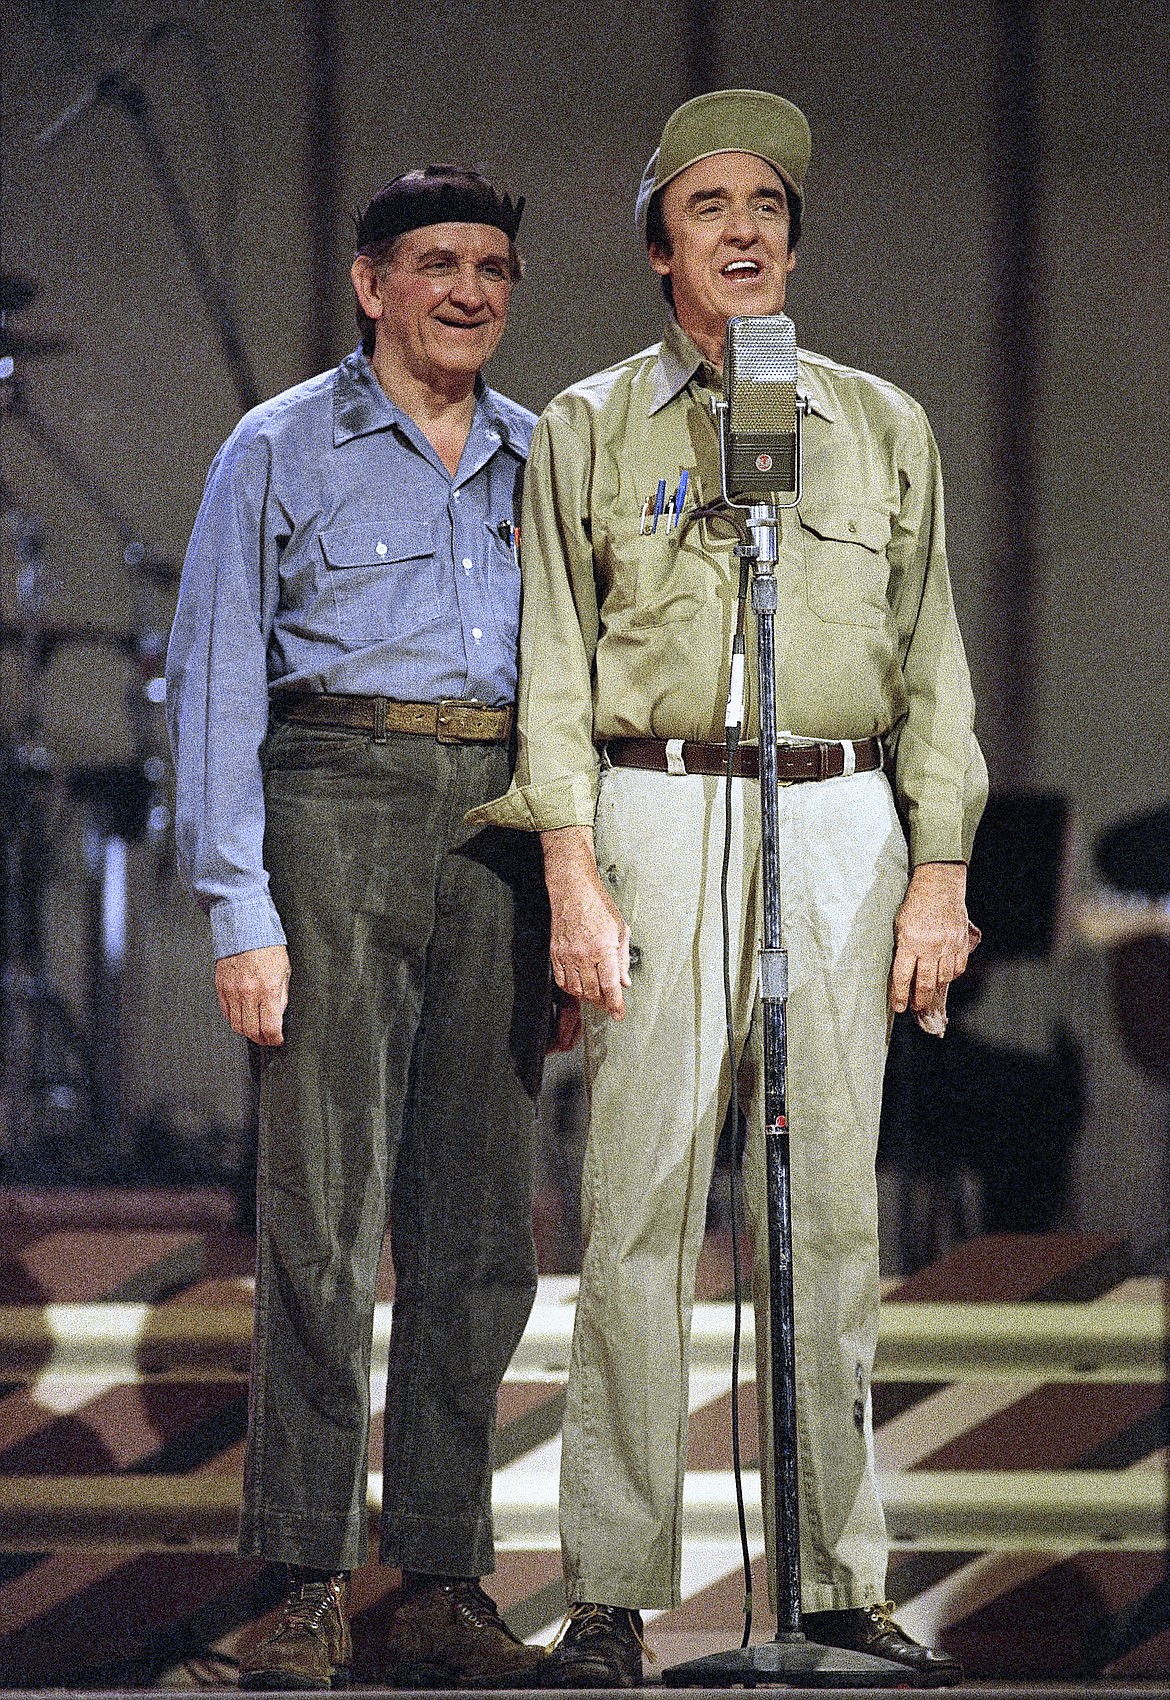 FILE - In this May 7, 1992 file photo, George Lindsey, left, and Jim Nabors, cast members from &#147;The Andy Griffith Show,&#148;  appear in Nashville, Tenn. Nabors died peacefully at his home in Honolulu on Thursday, Nov. 30, 2017, with his husband Stan Cadwallader at his side. He was 87. (AP Photo, File)